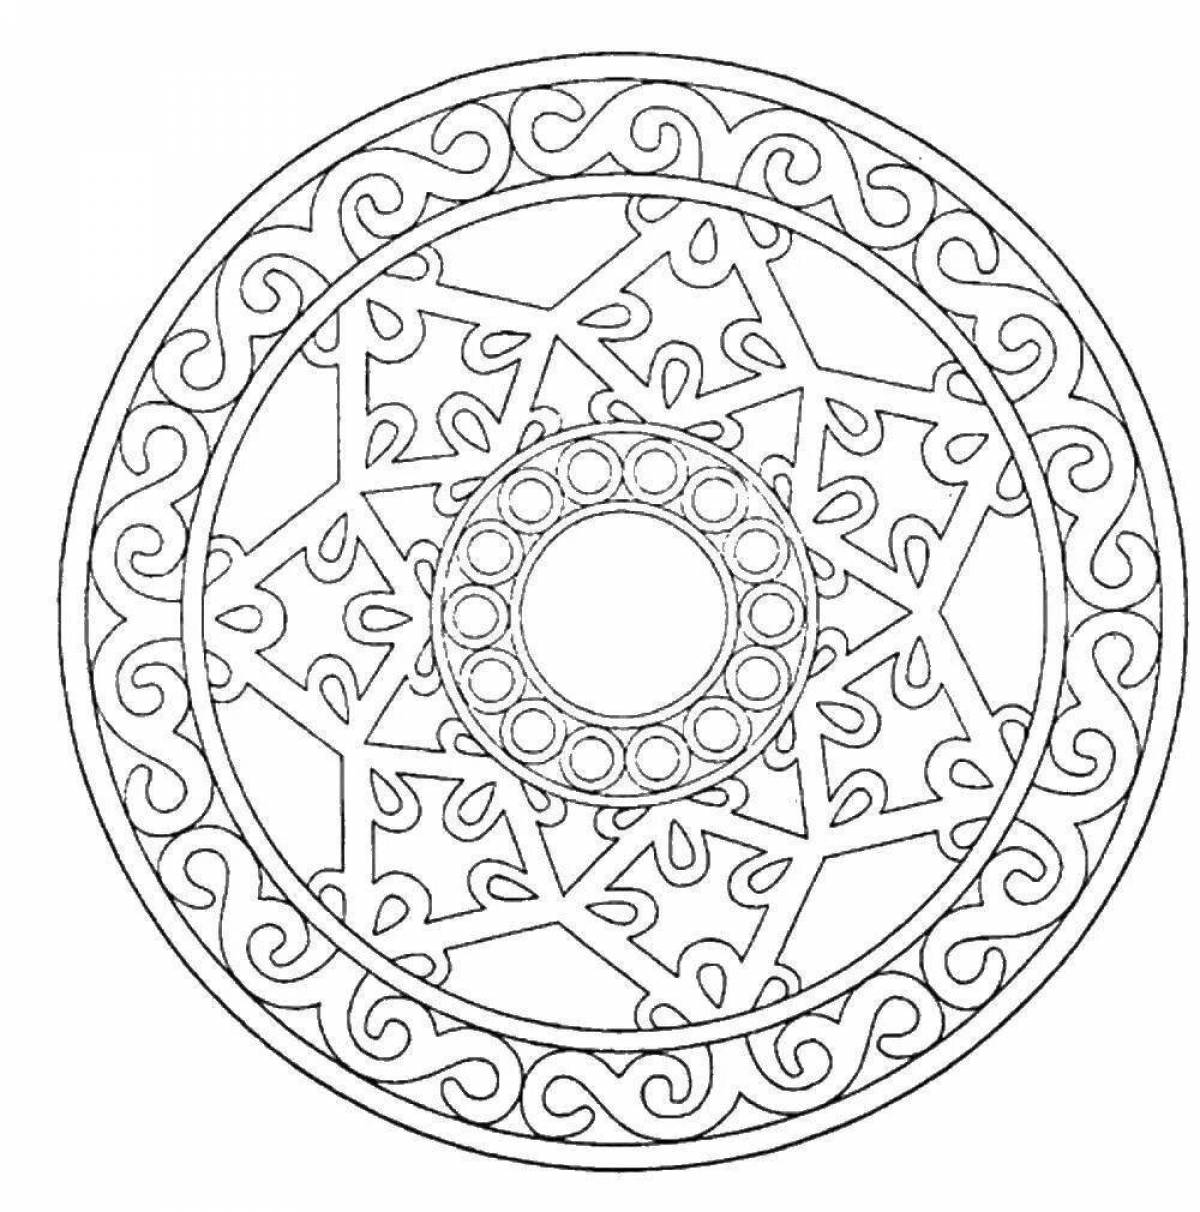 Fancy circle coloring page